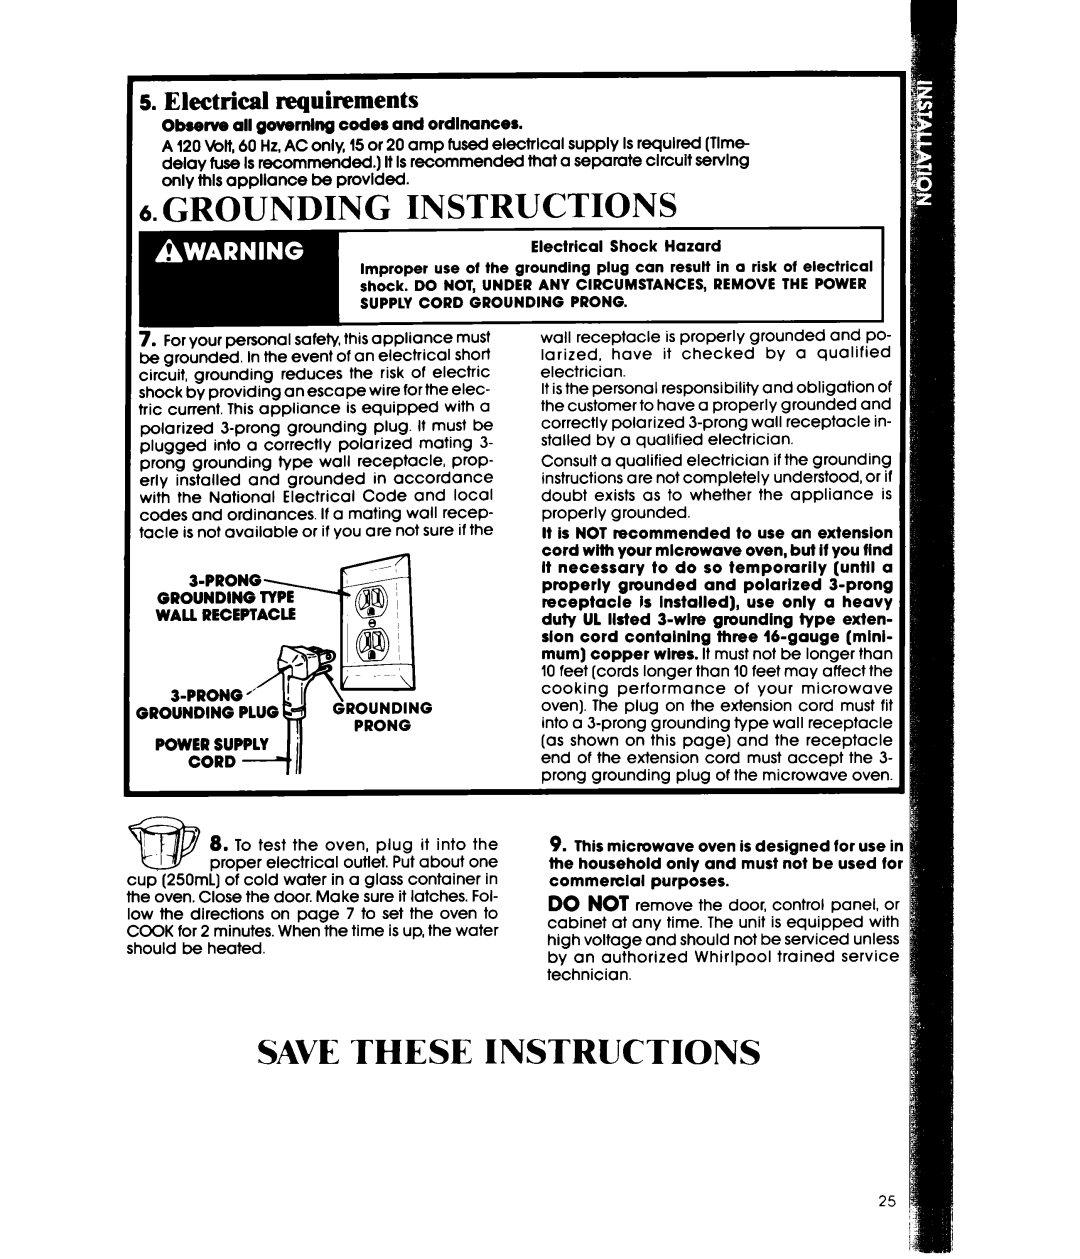 Whirlpool MW3600XW, MW3601XW manual Grounding Instructions, Save These Instructions, Electrical requirements 